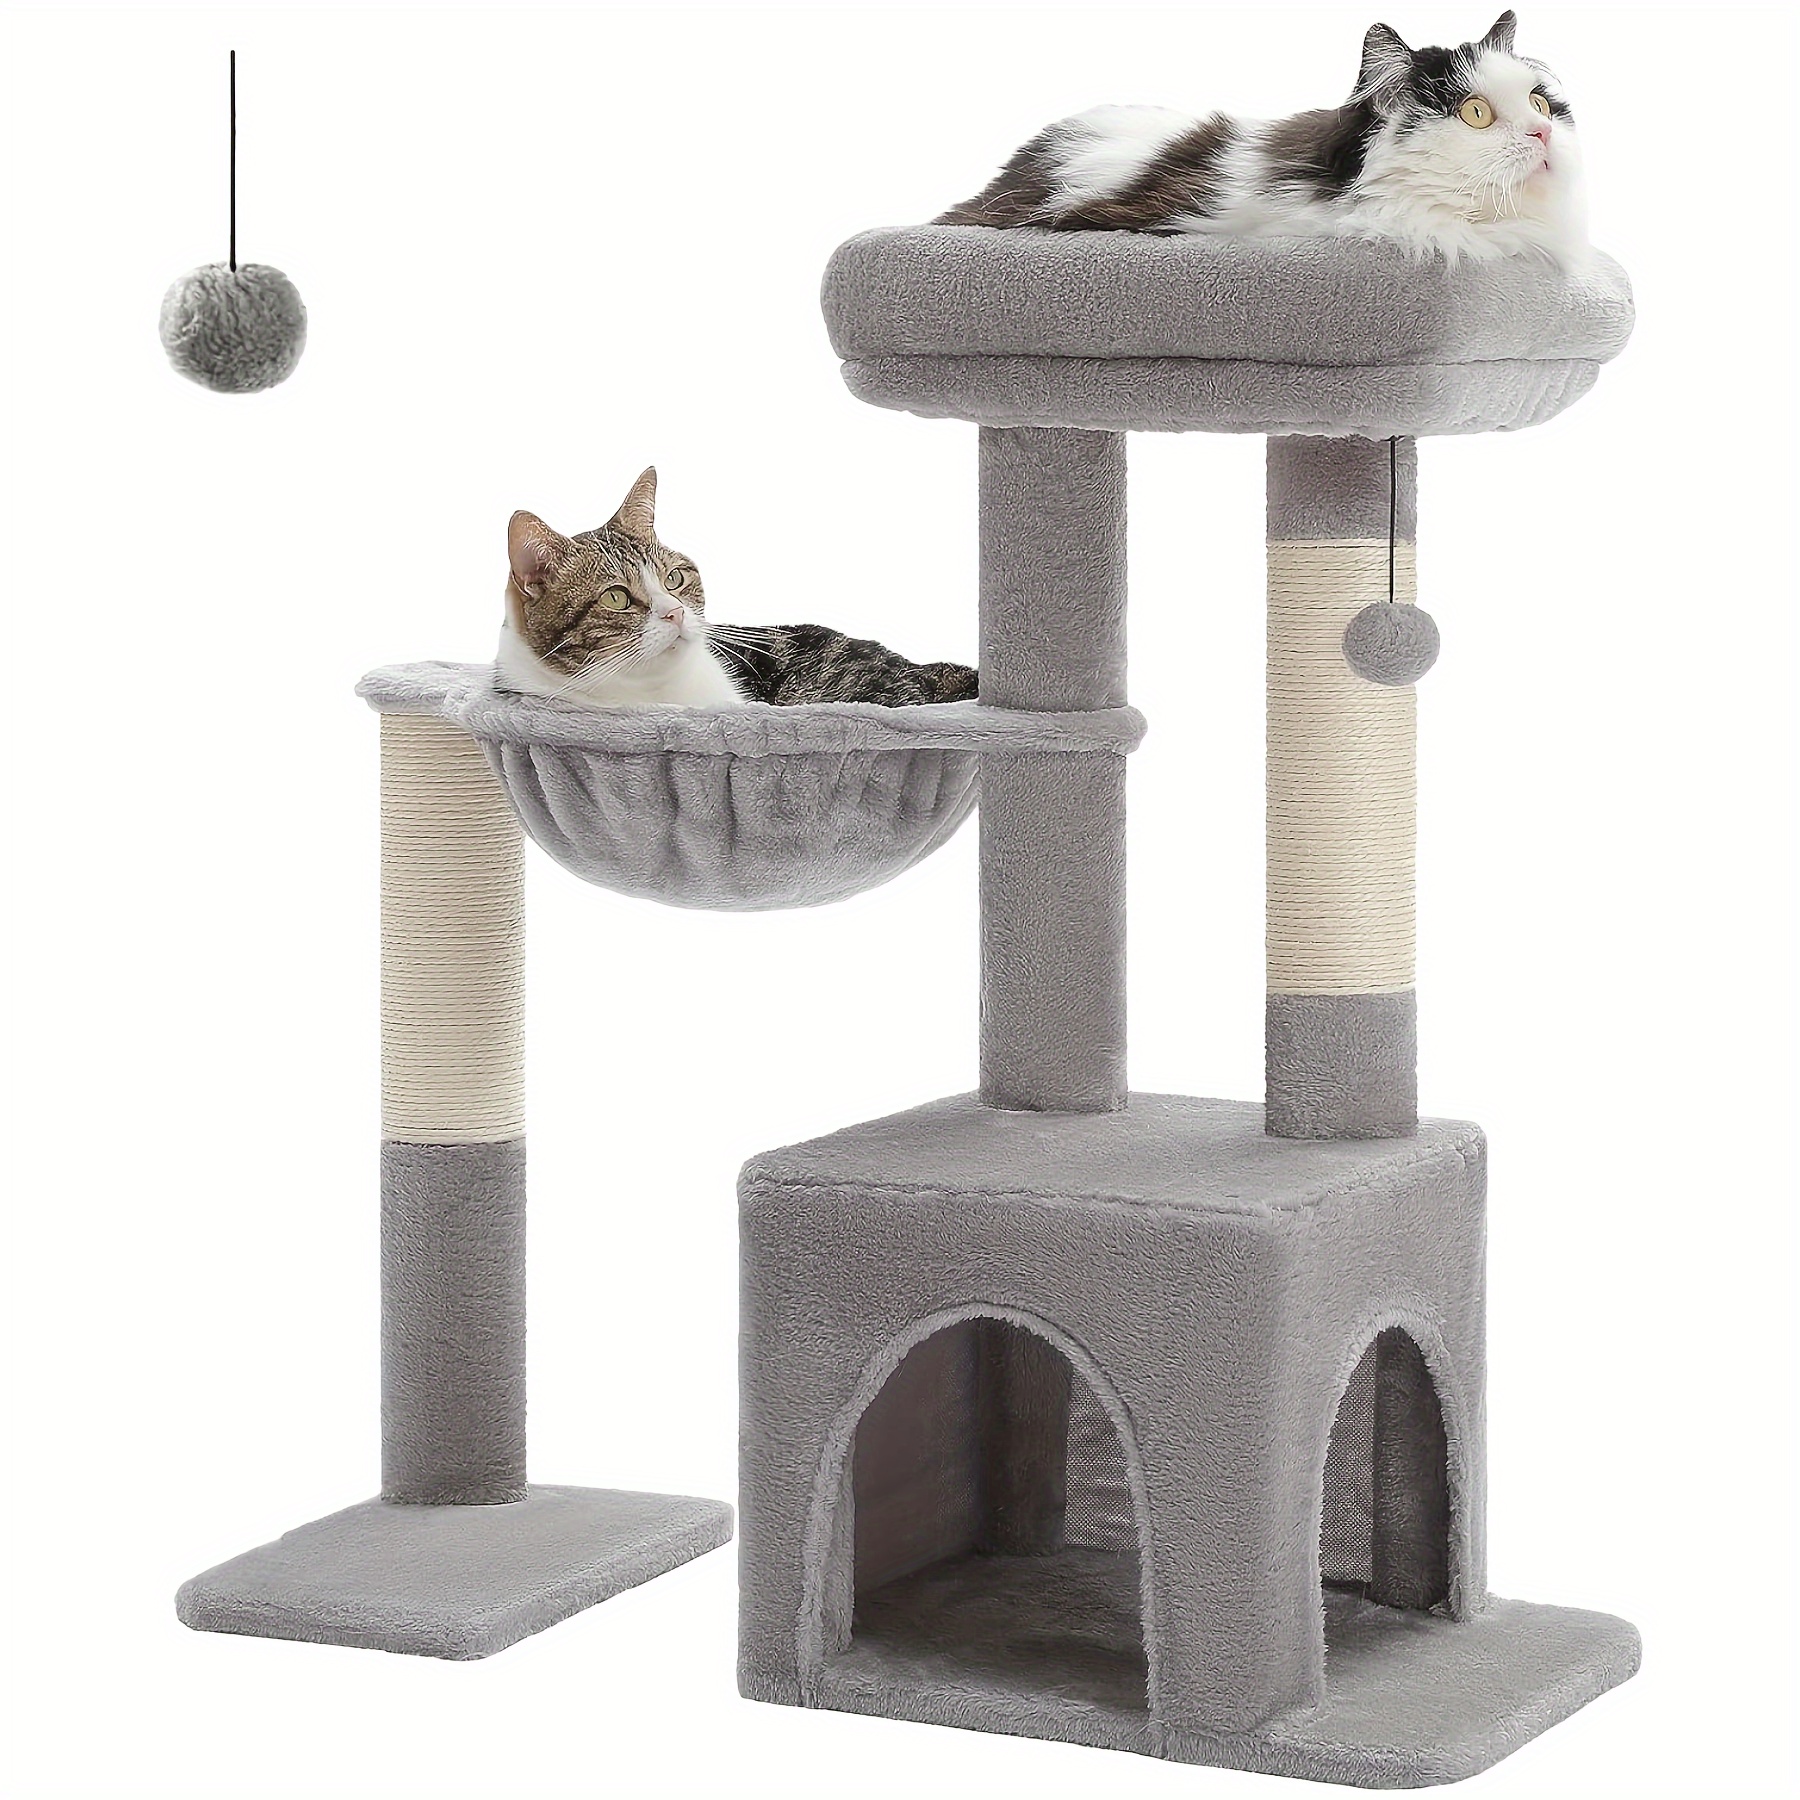 

Cat Tree, With Cat Apartment, Scratching Posts And Perches, Cat Furniture, Cat Activity Center, Suitable For Small And Medium-sized Cats